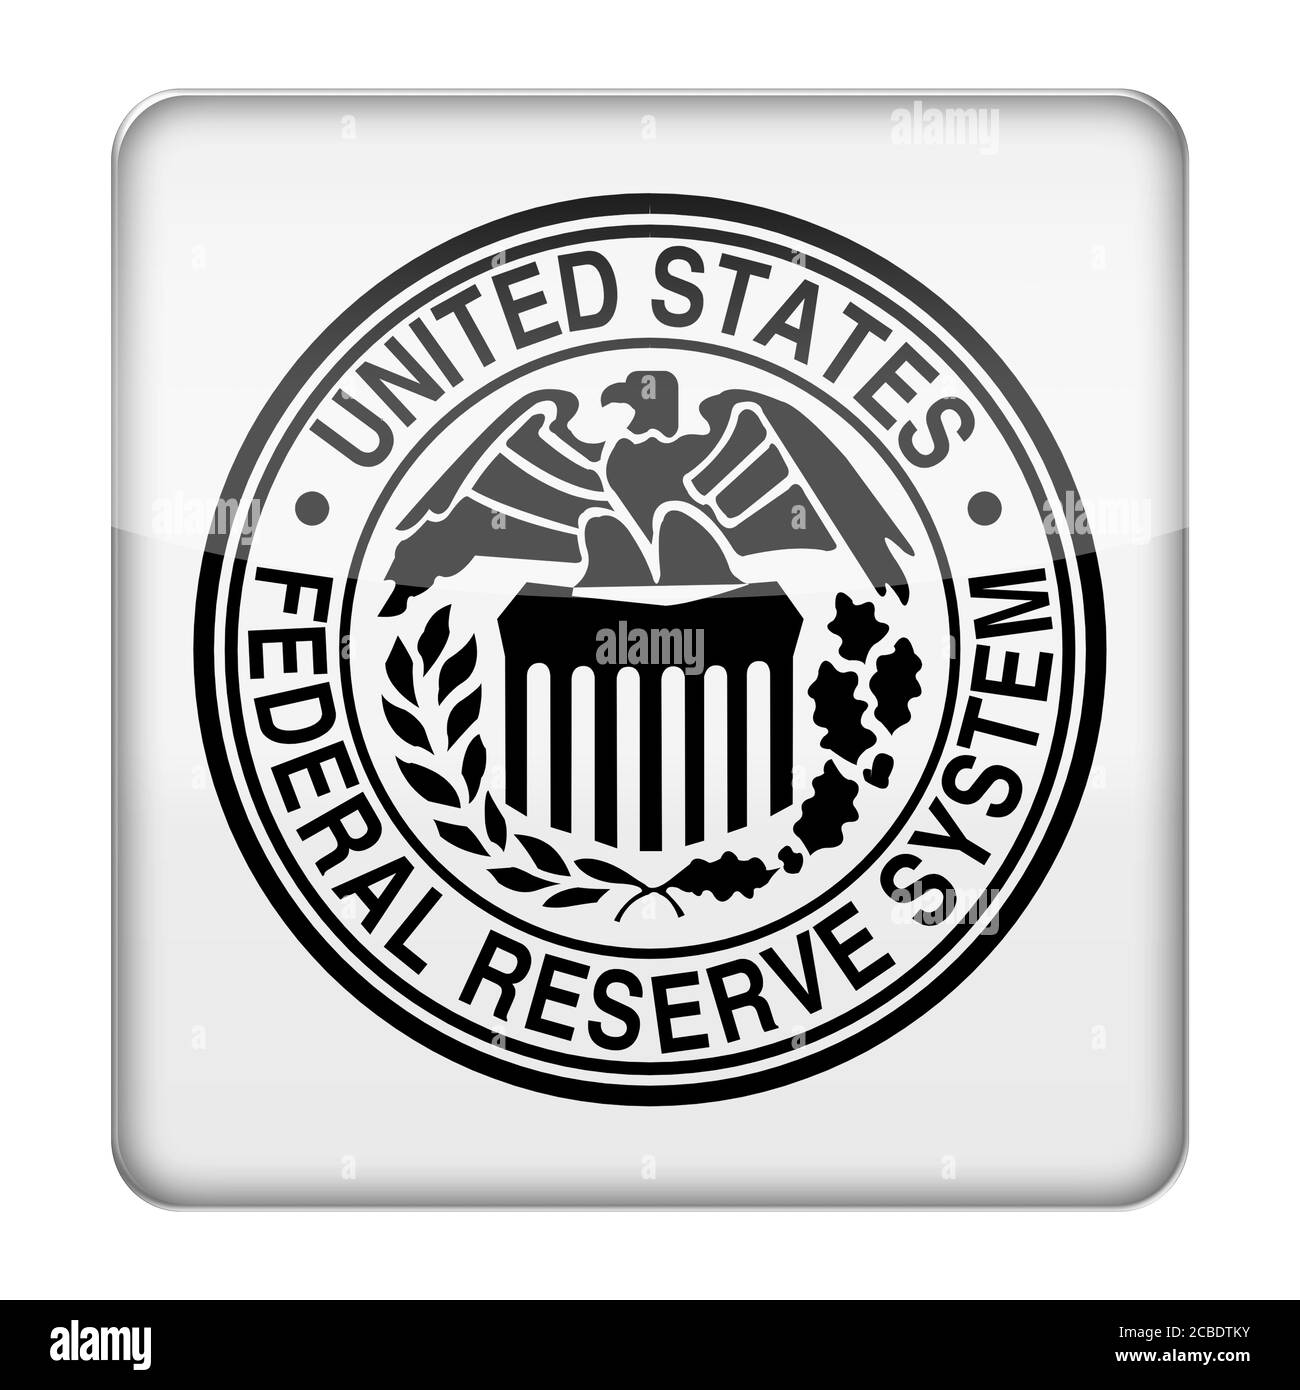 Federal Reserve Fed logo Stock Photo